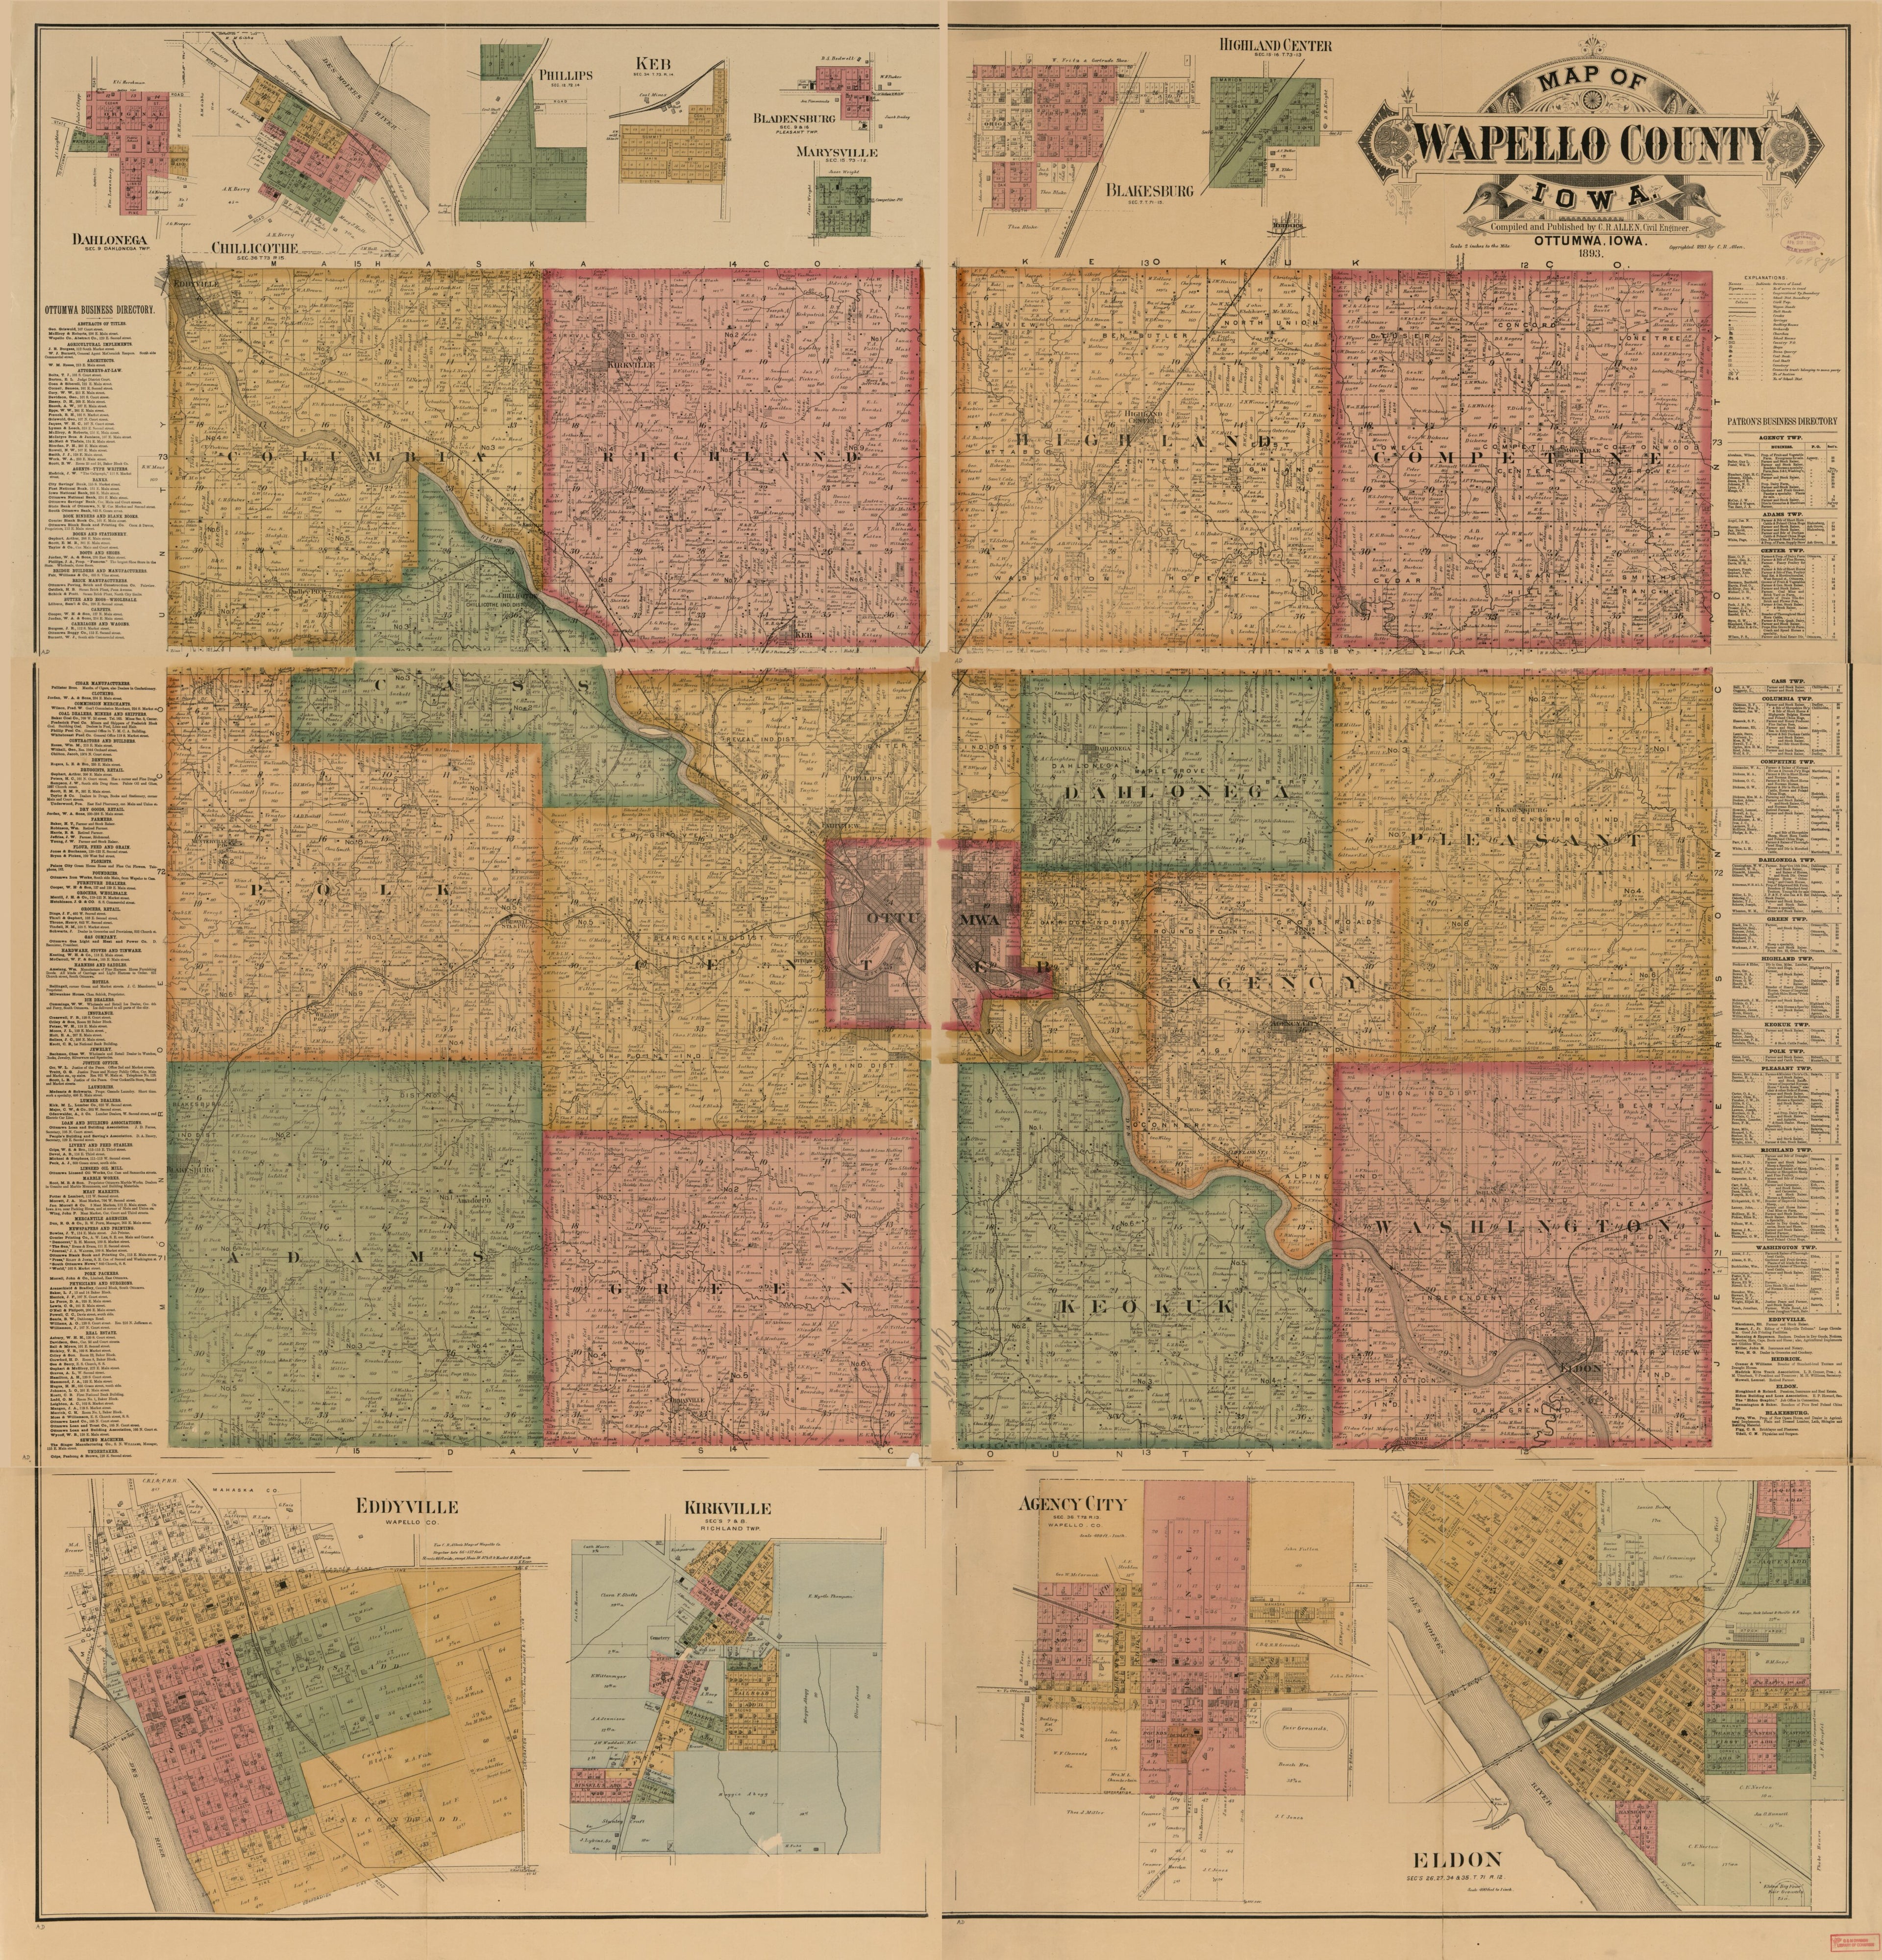 This old map of Map of Wapello County, Iowa from 1893 was created by C. R. Allen in 1893